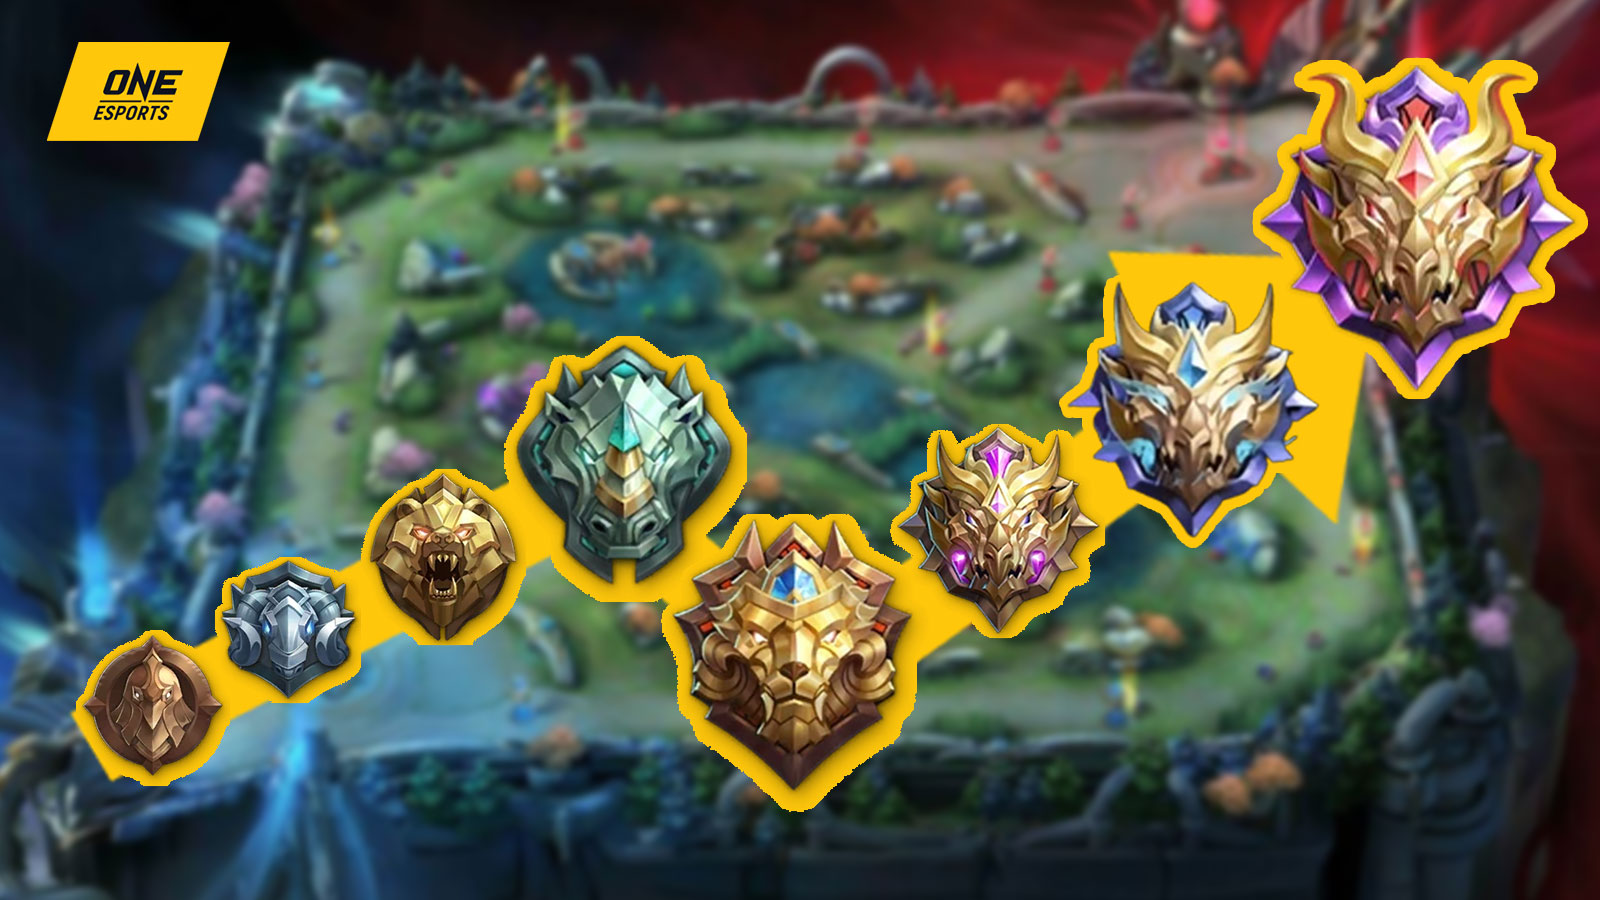 How to rank up fast in Mobile Legends and achieve your goals - ONE Esports